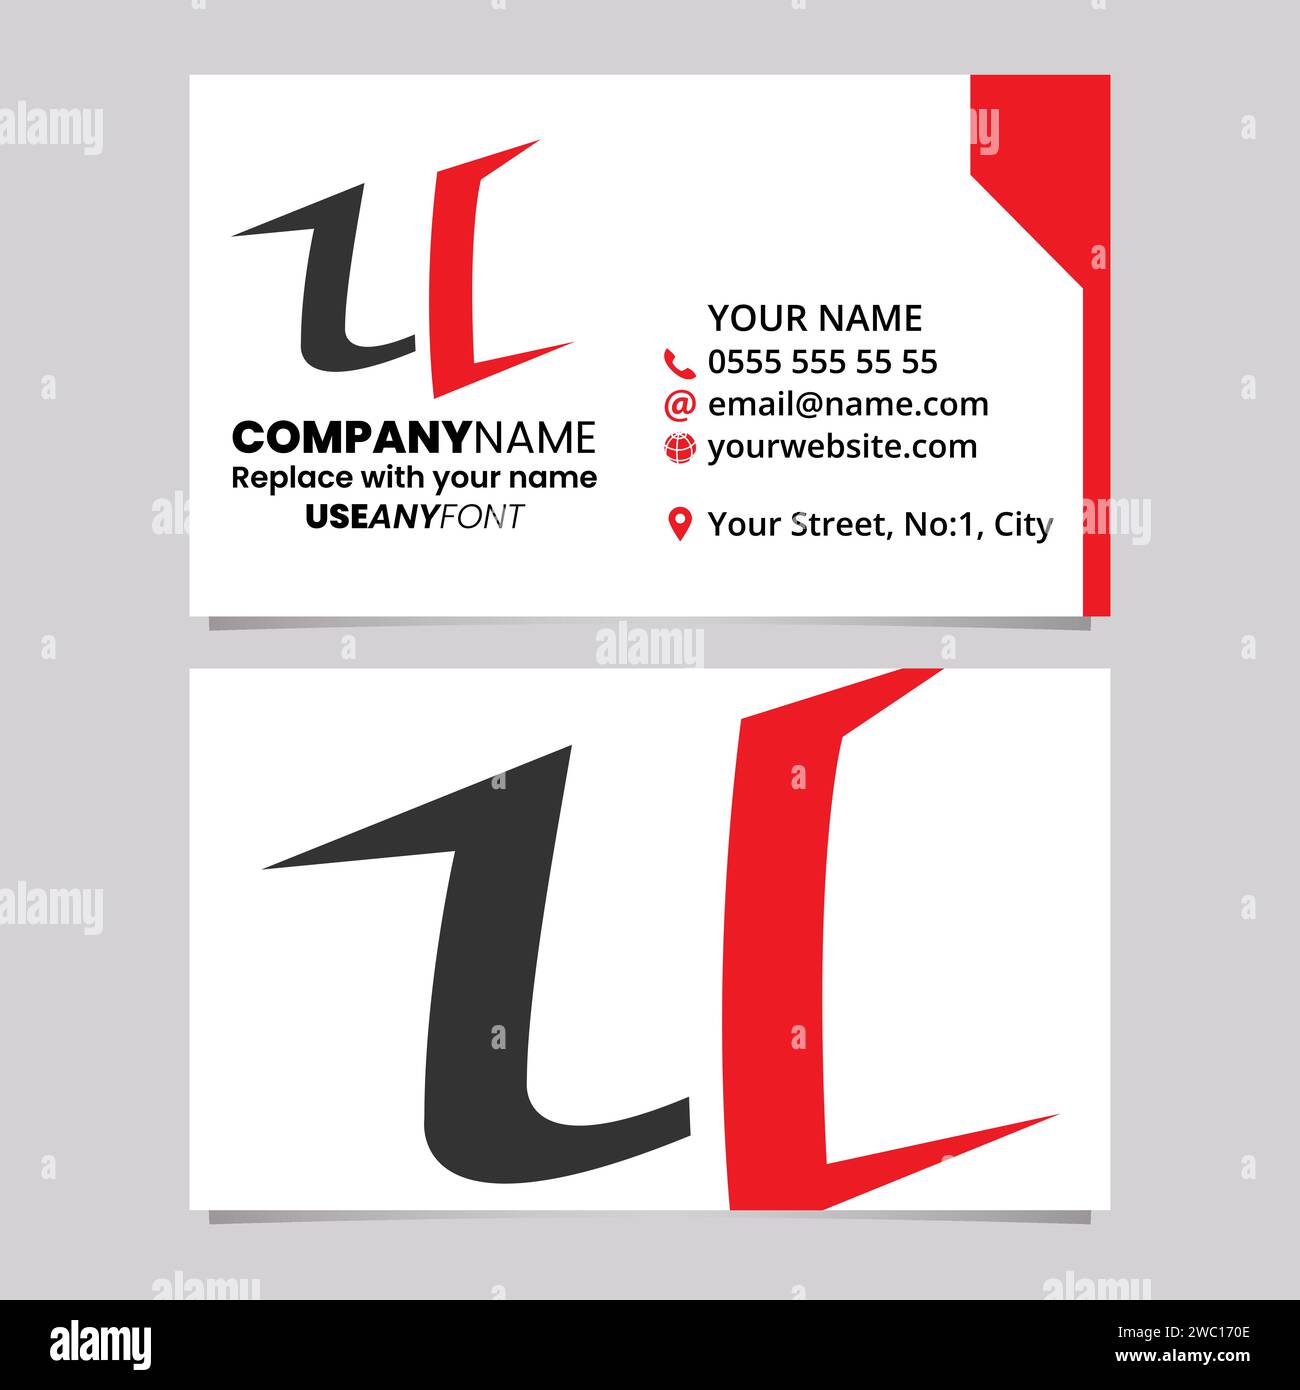 Red and Black Business Card Template with Spiky Shaped Letter U Logo Icon Over a Light Grey Background Stock Vector